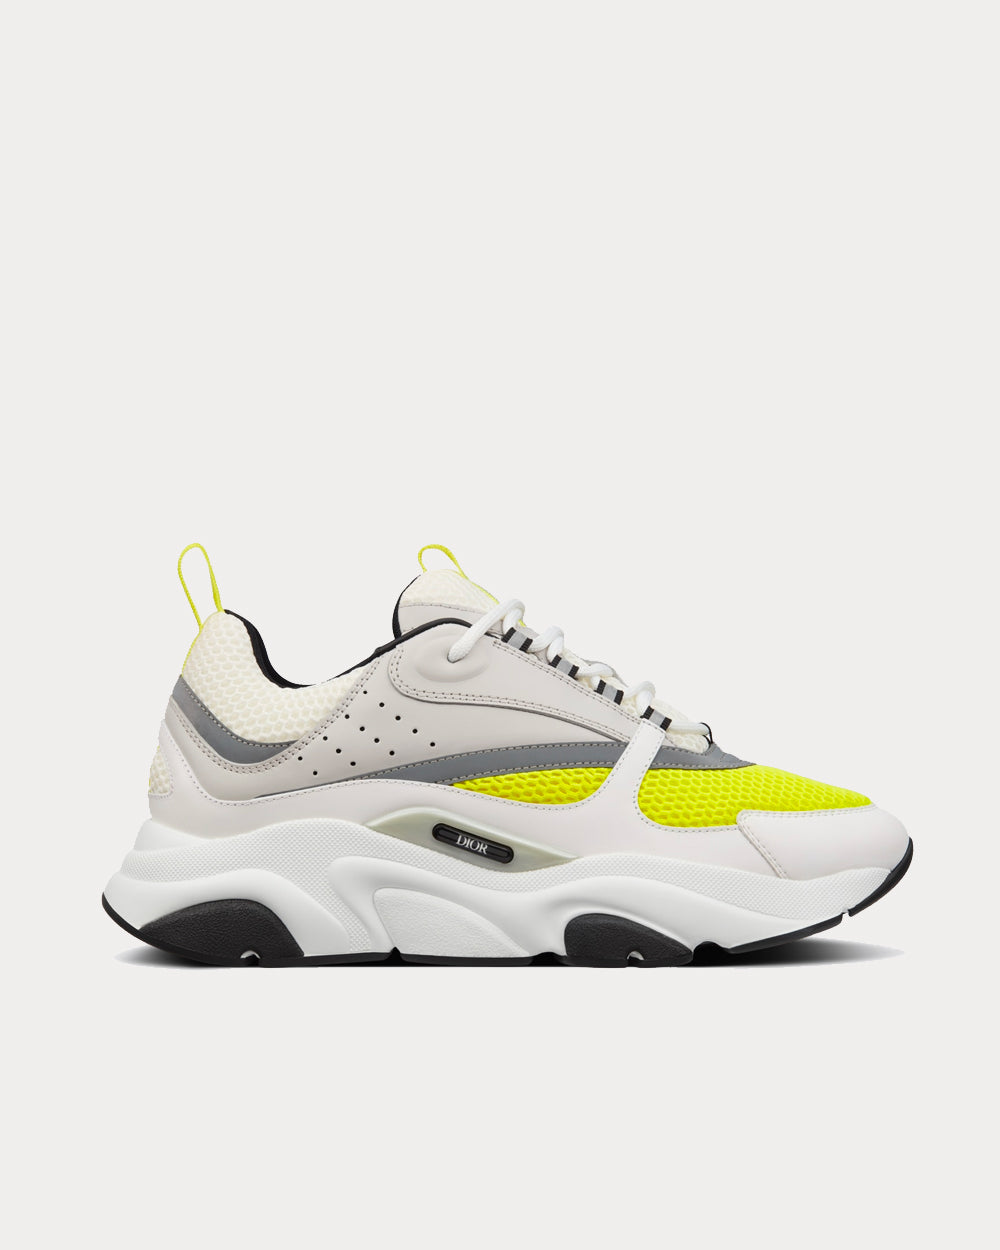 Dior Vibe White Mesh and Black Calfskin with Fluorescent Yellow Rubber Low  Top Sneakers - Sneak in Peace